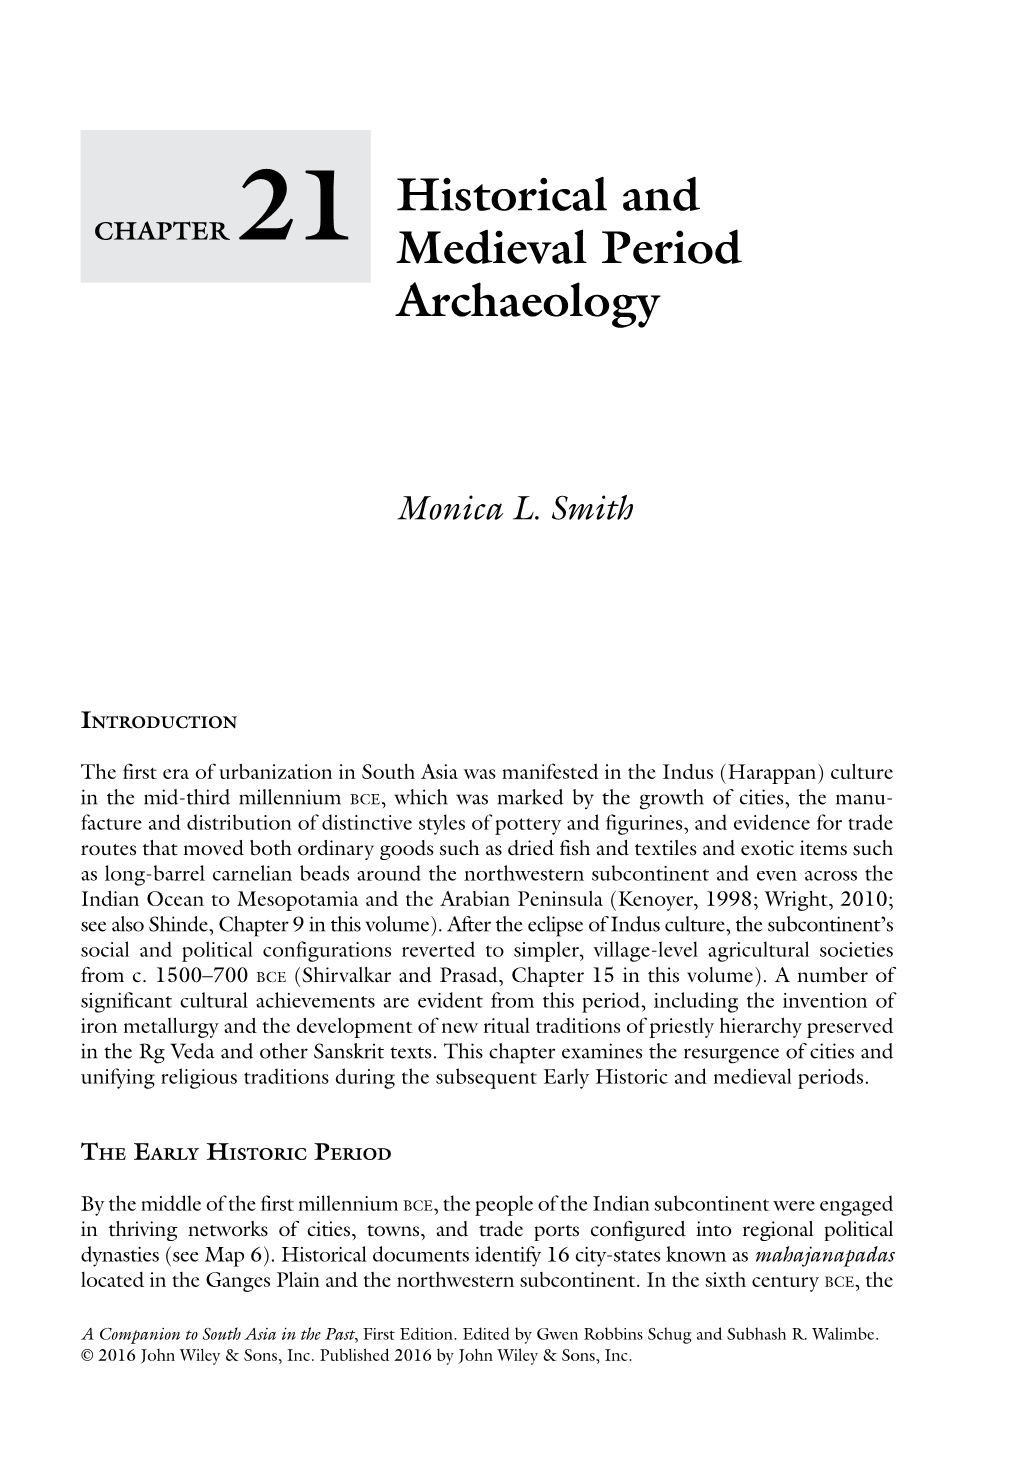 Historical and Medieval Period Archaeology